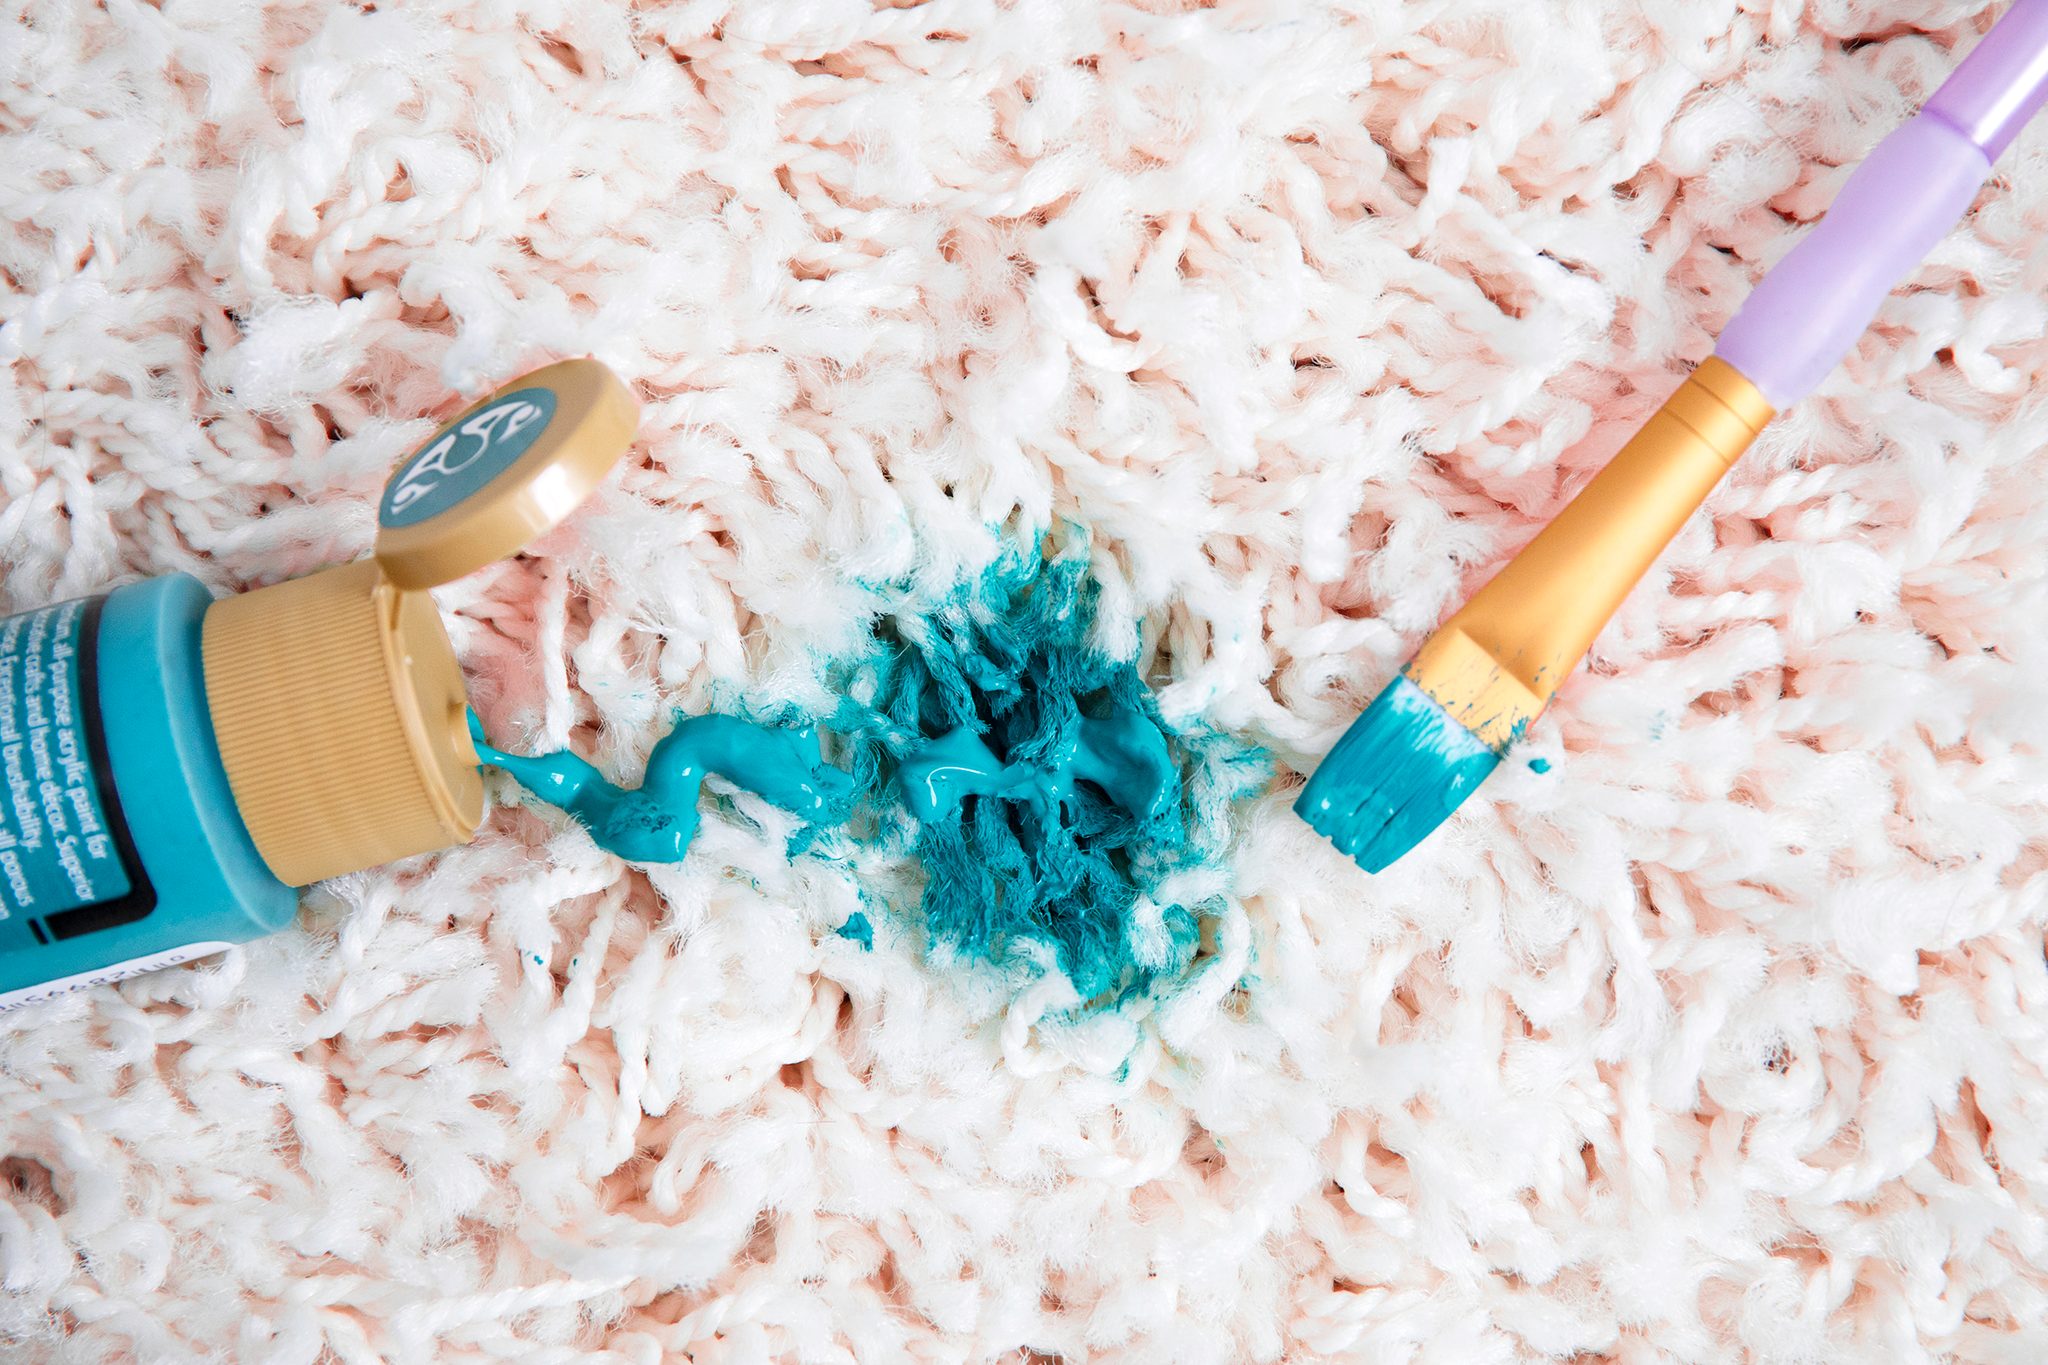 How to Get Paint Out of Carpet — Remove Acrylic, Latex Paint from Carpet